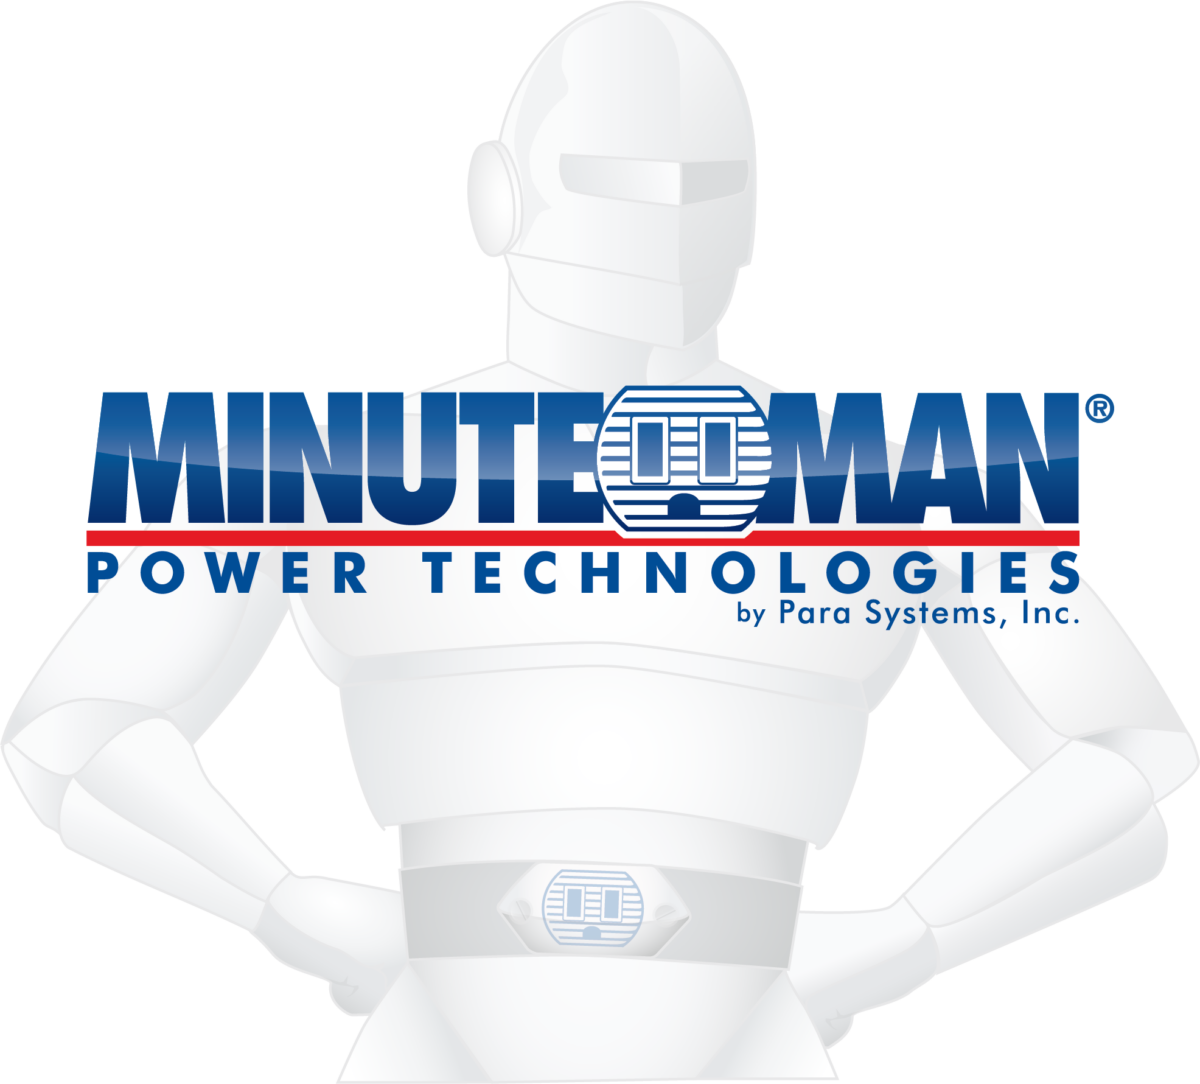 Minuteman Power Technologies (by Para Systems, Inc.)